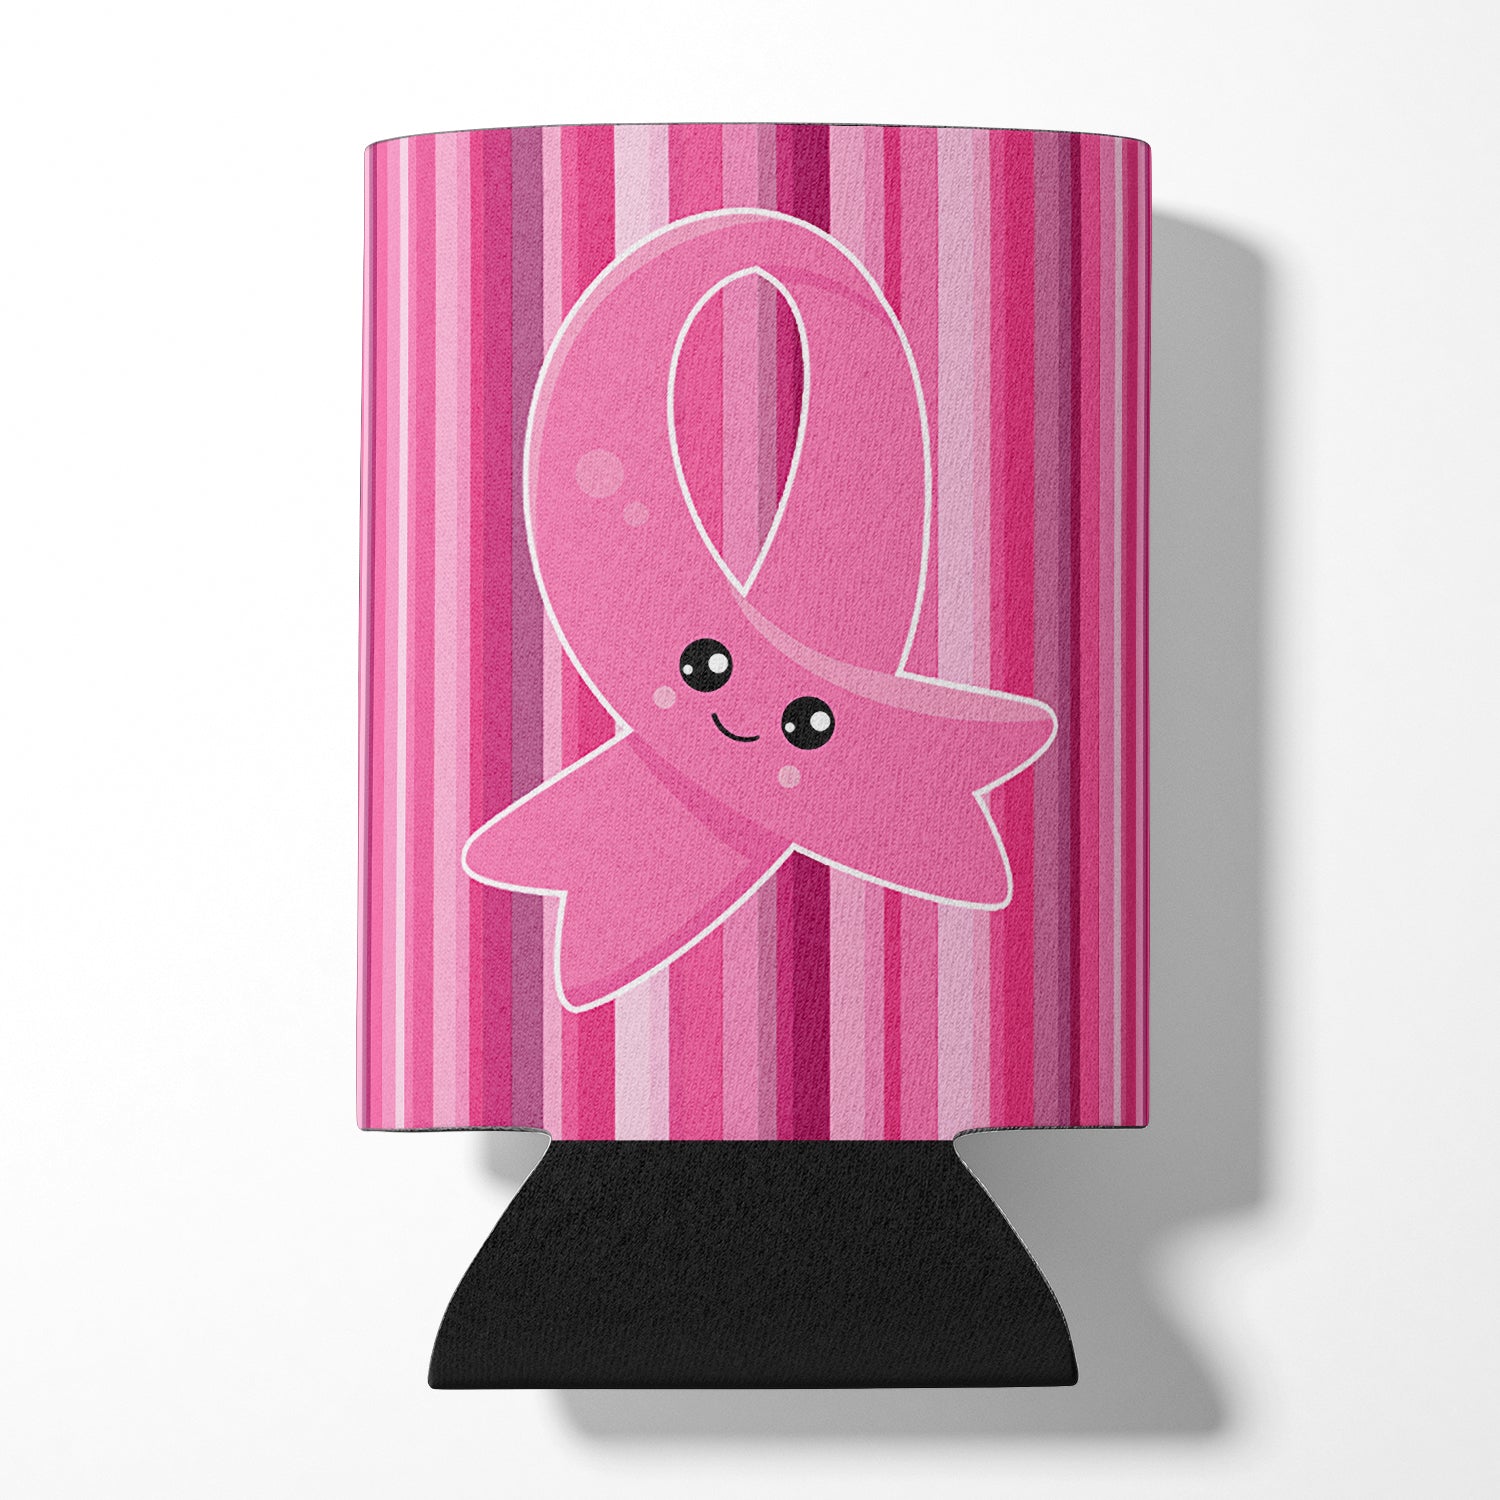 Breast Cancer Awareness Ribbon Face Can or Bottle Hugger BB6978CC